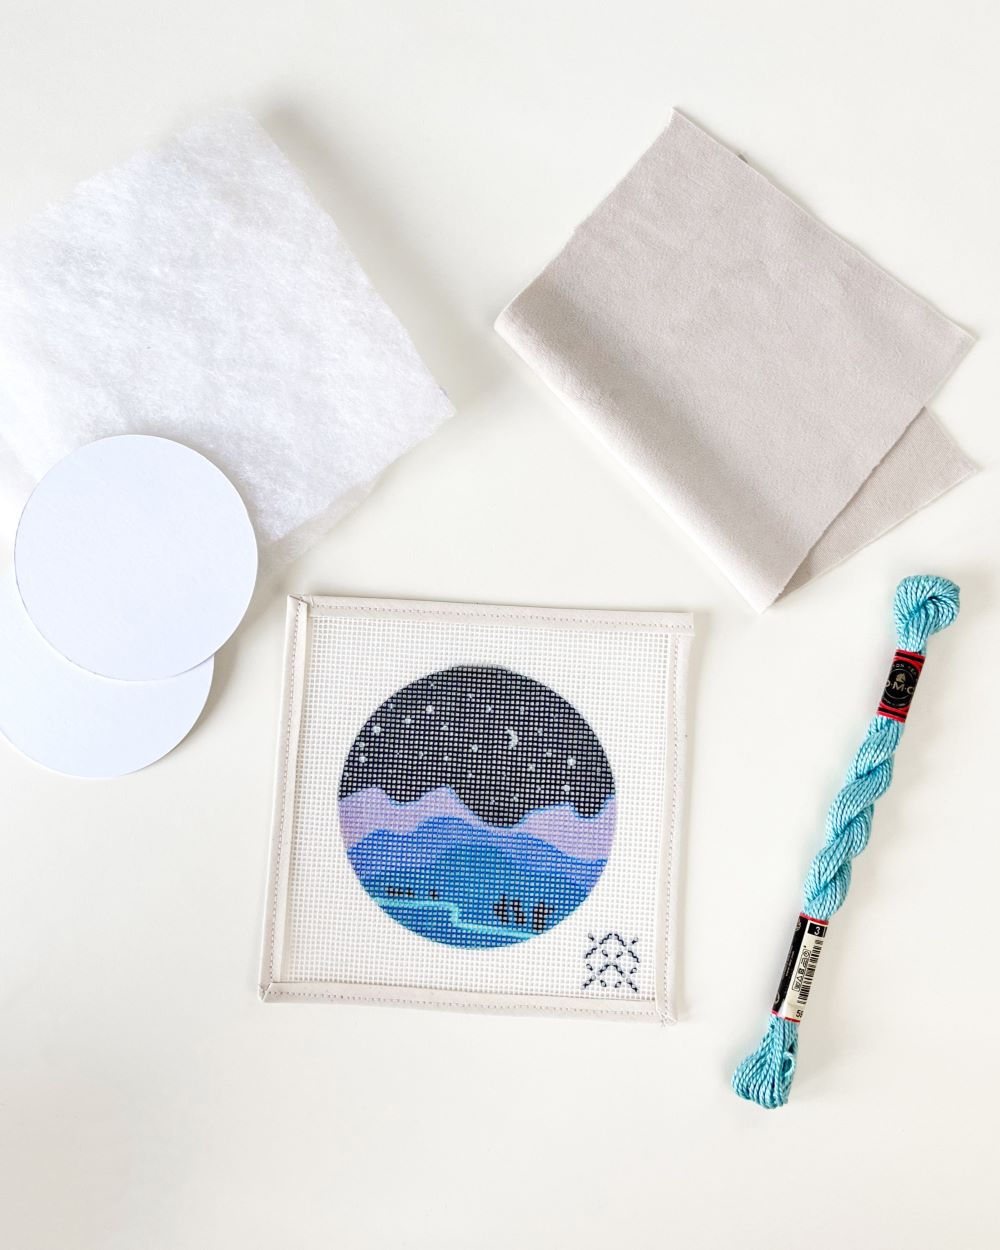 Starry Night Needlepoint Ornament Kit - finishing materials included